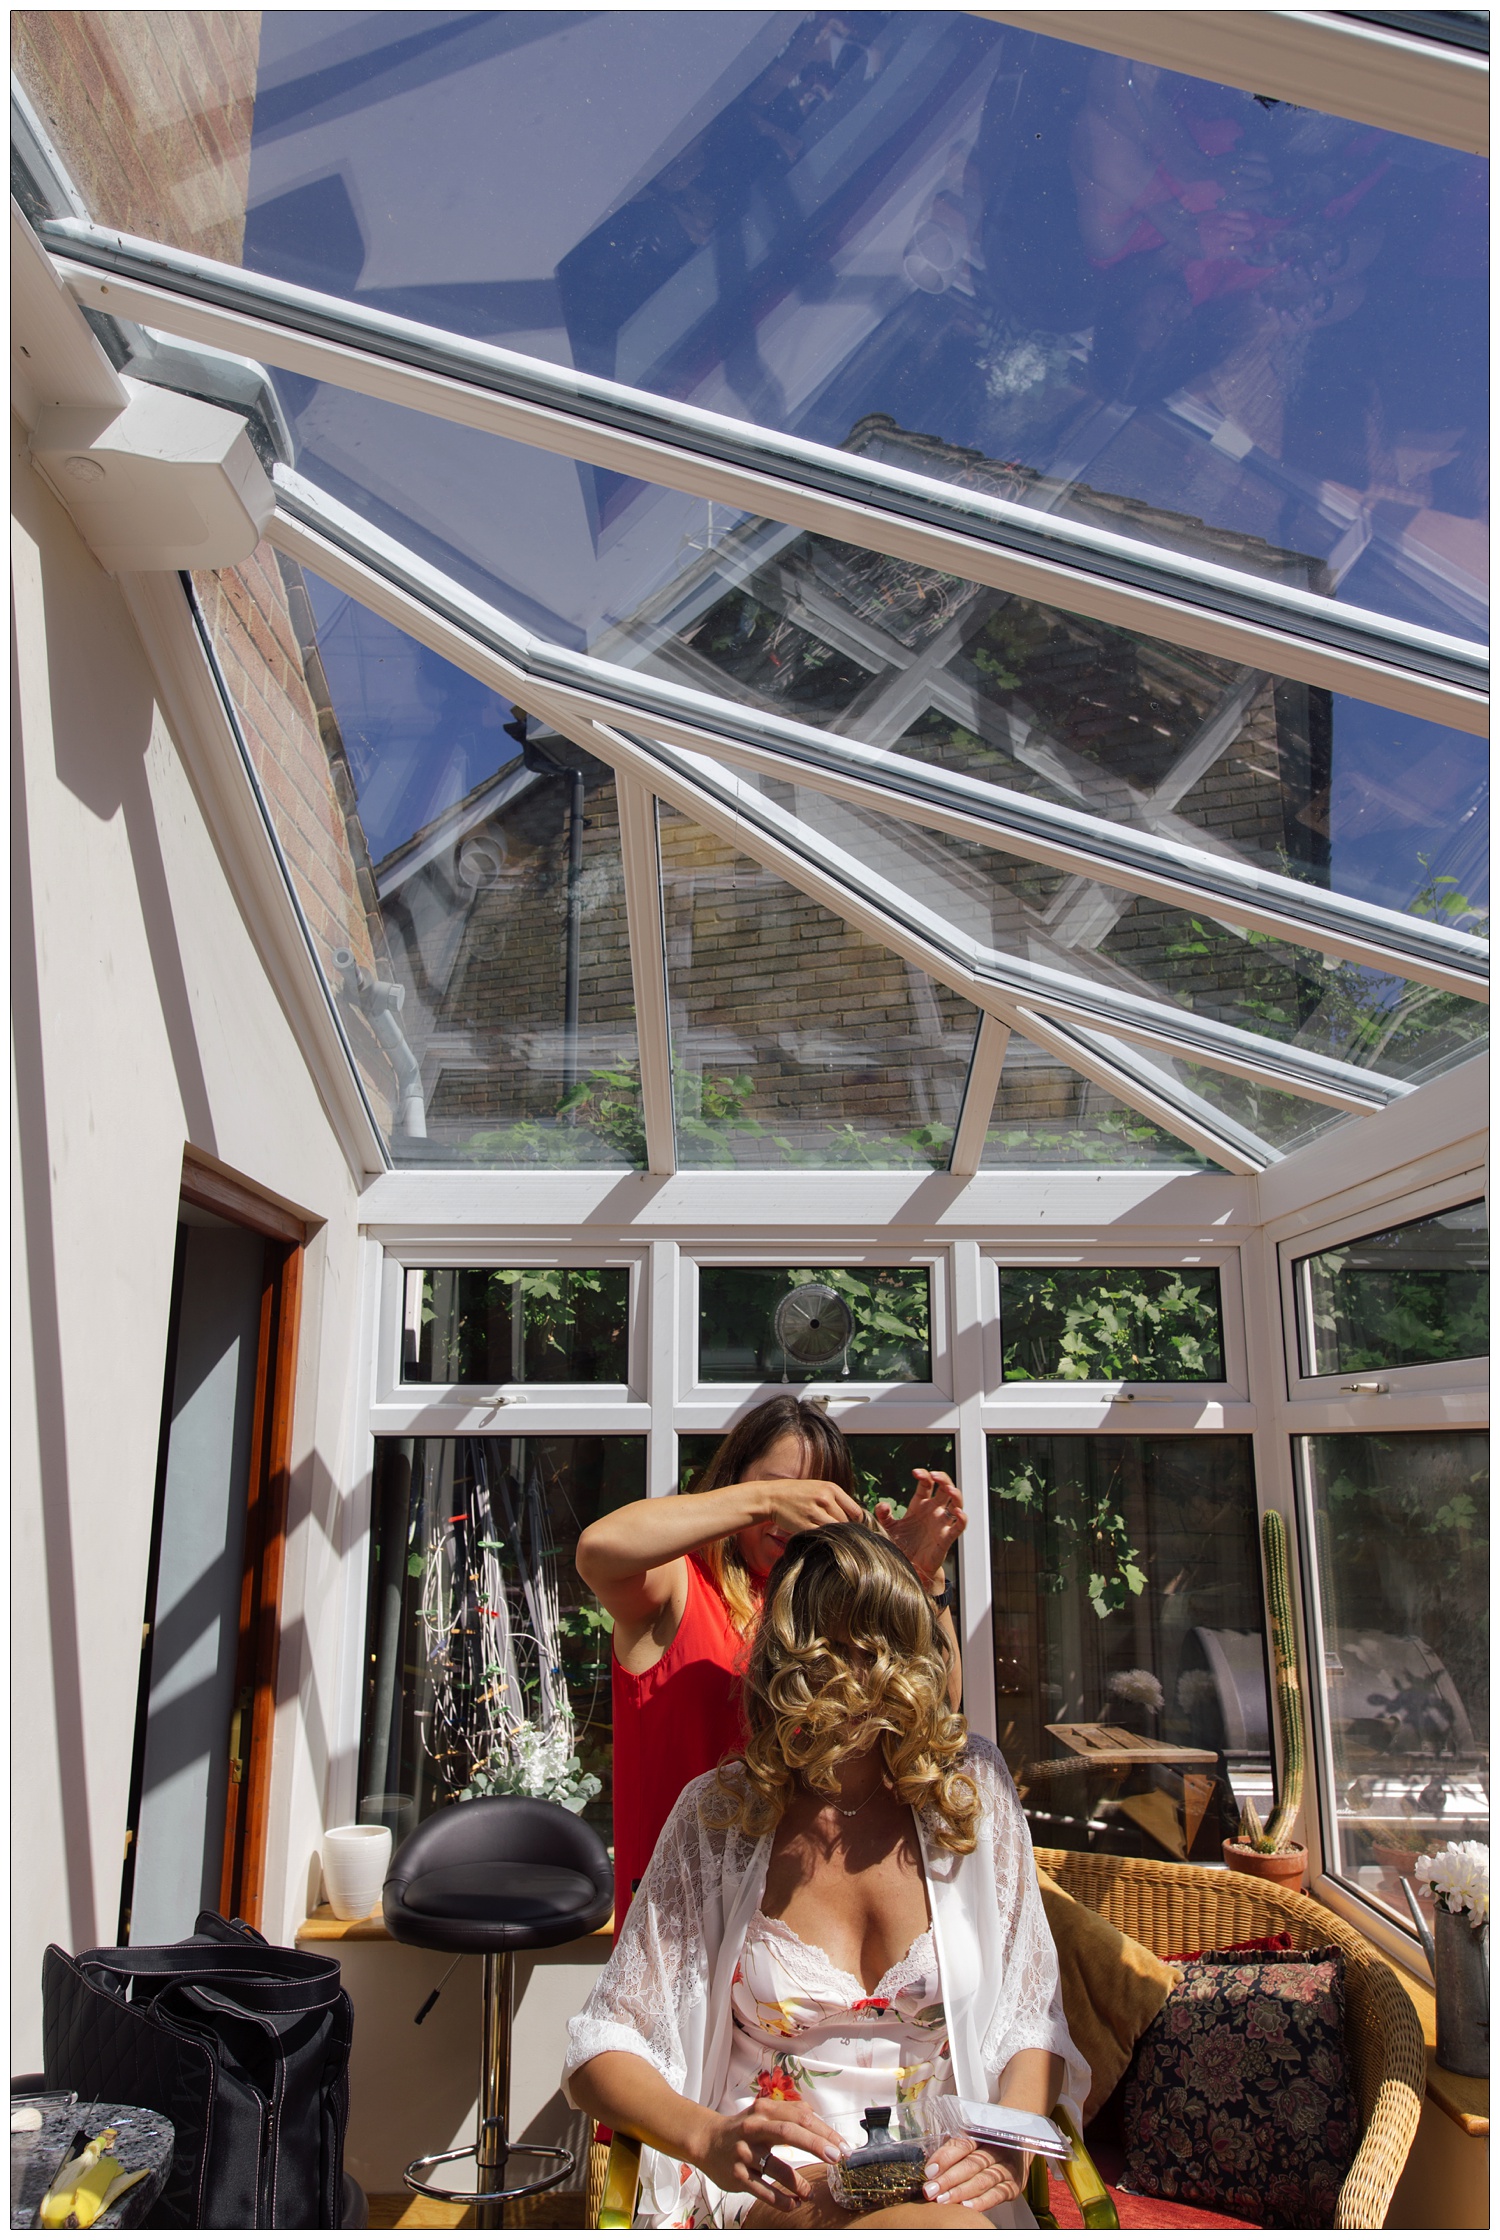 In a conservatory at home a woman is having her hair done. The sky is blue.